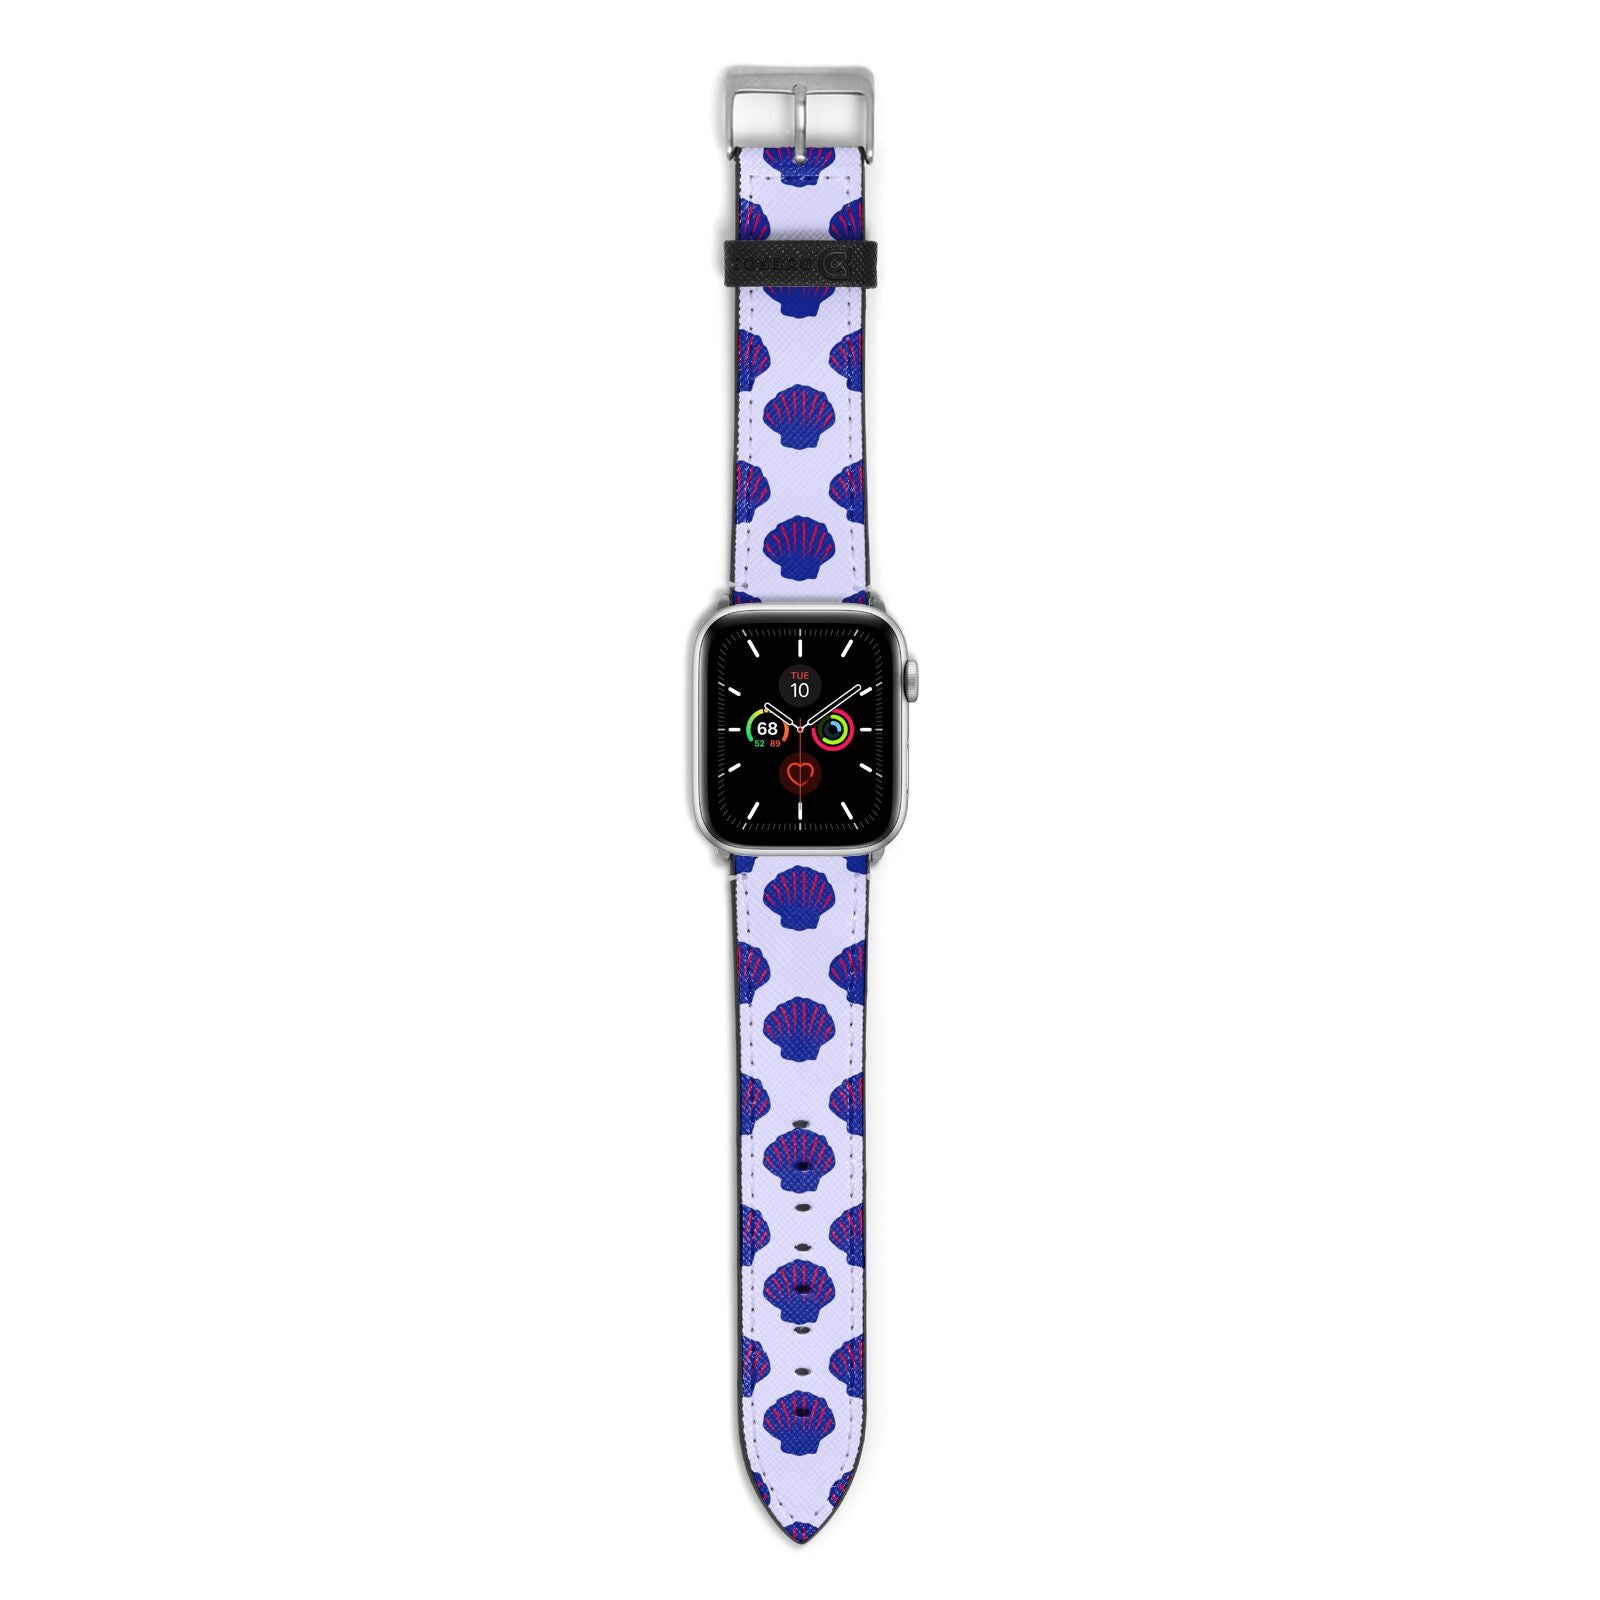 Shell Pattern Apple Watch Strap with Silver Hardware